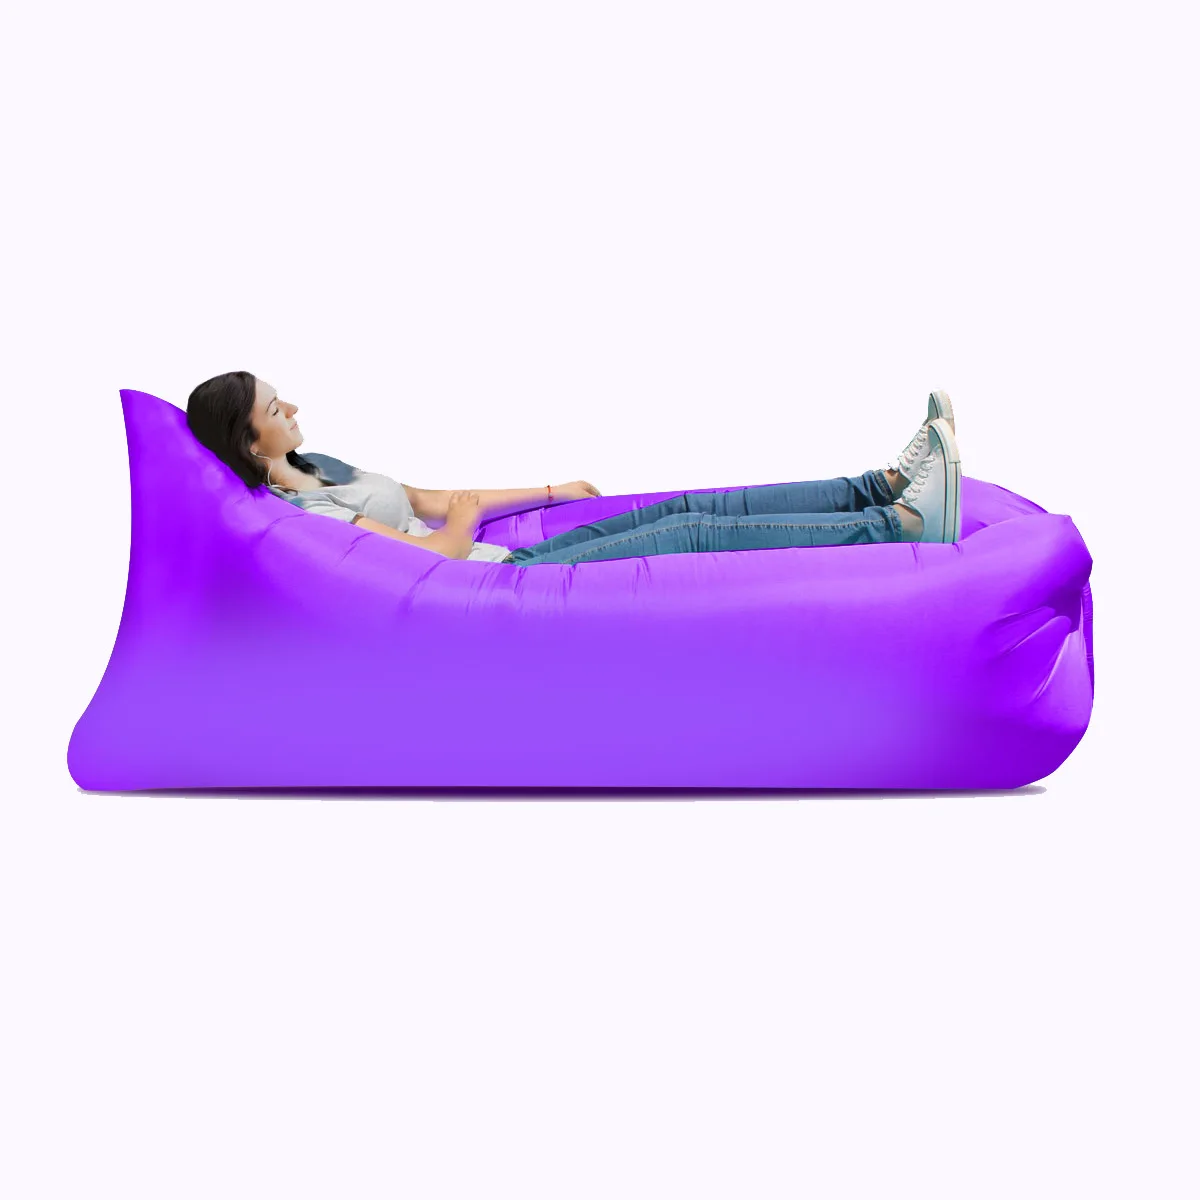 

Camping chair Beach Picnic Inflatable Sofa Lazy Ultralight Down Sleeping Bag Air Bed Inflatable Sofa Lounger Outdoor Furniture